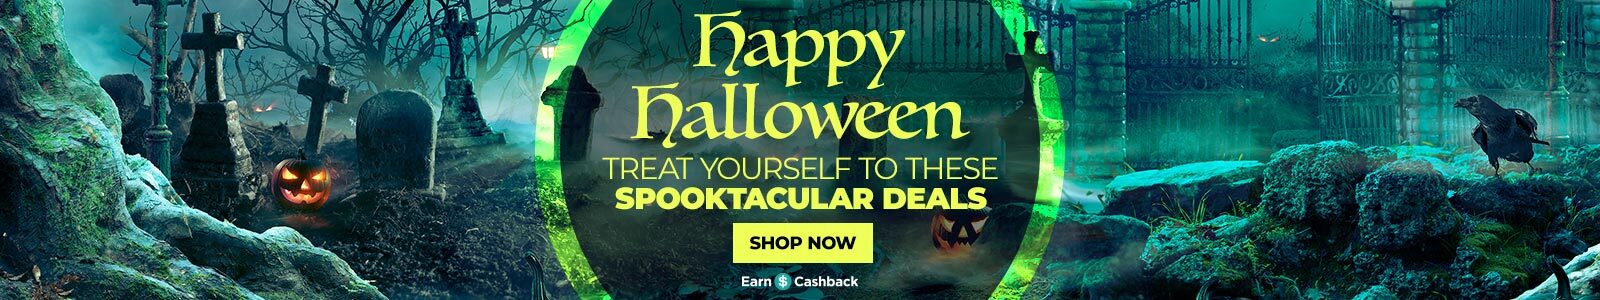 happy halloween treat yourself to these spooktacular deals shop now earn $cashback